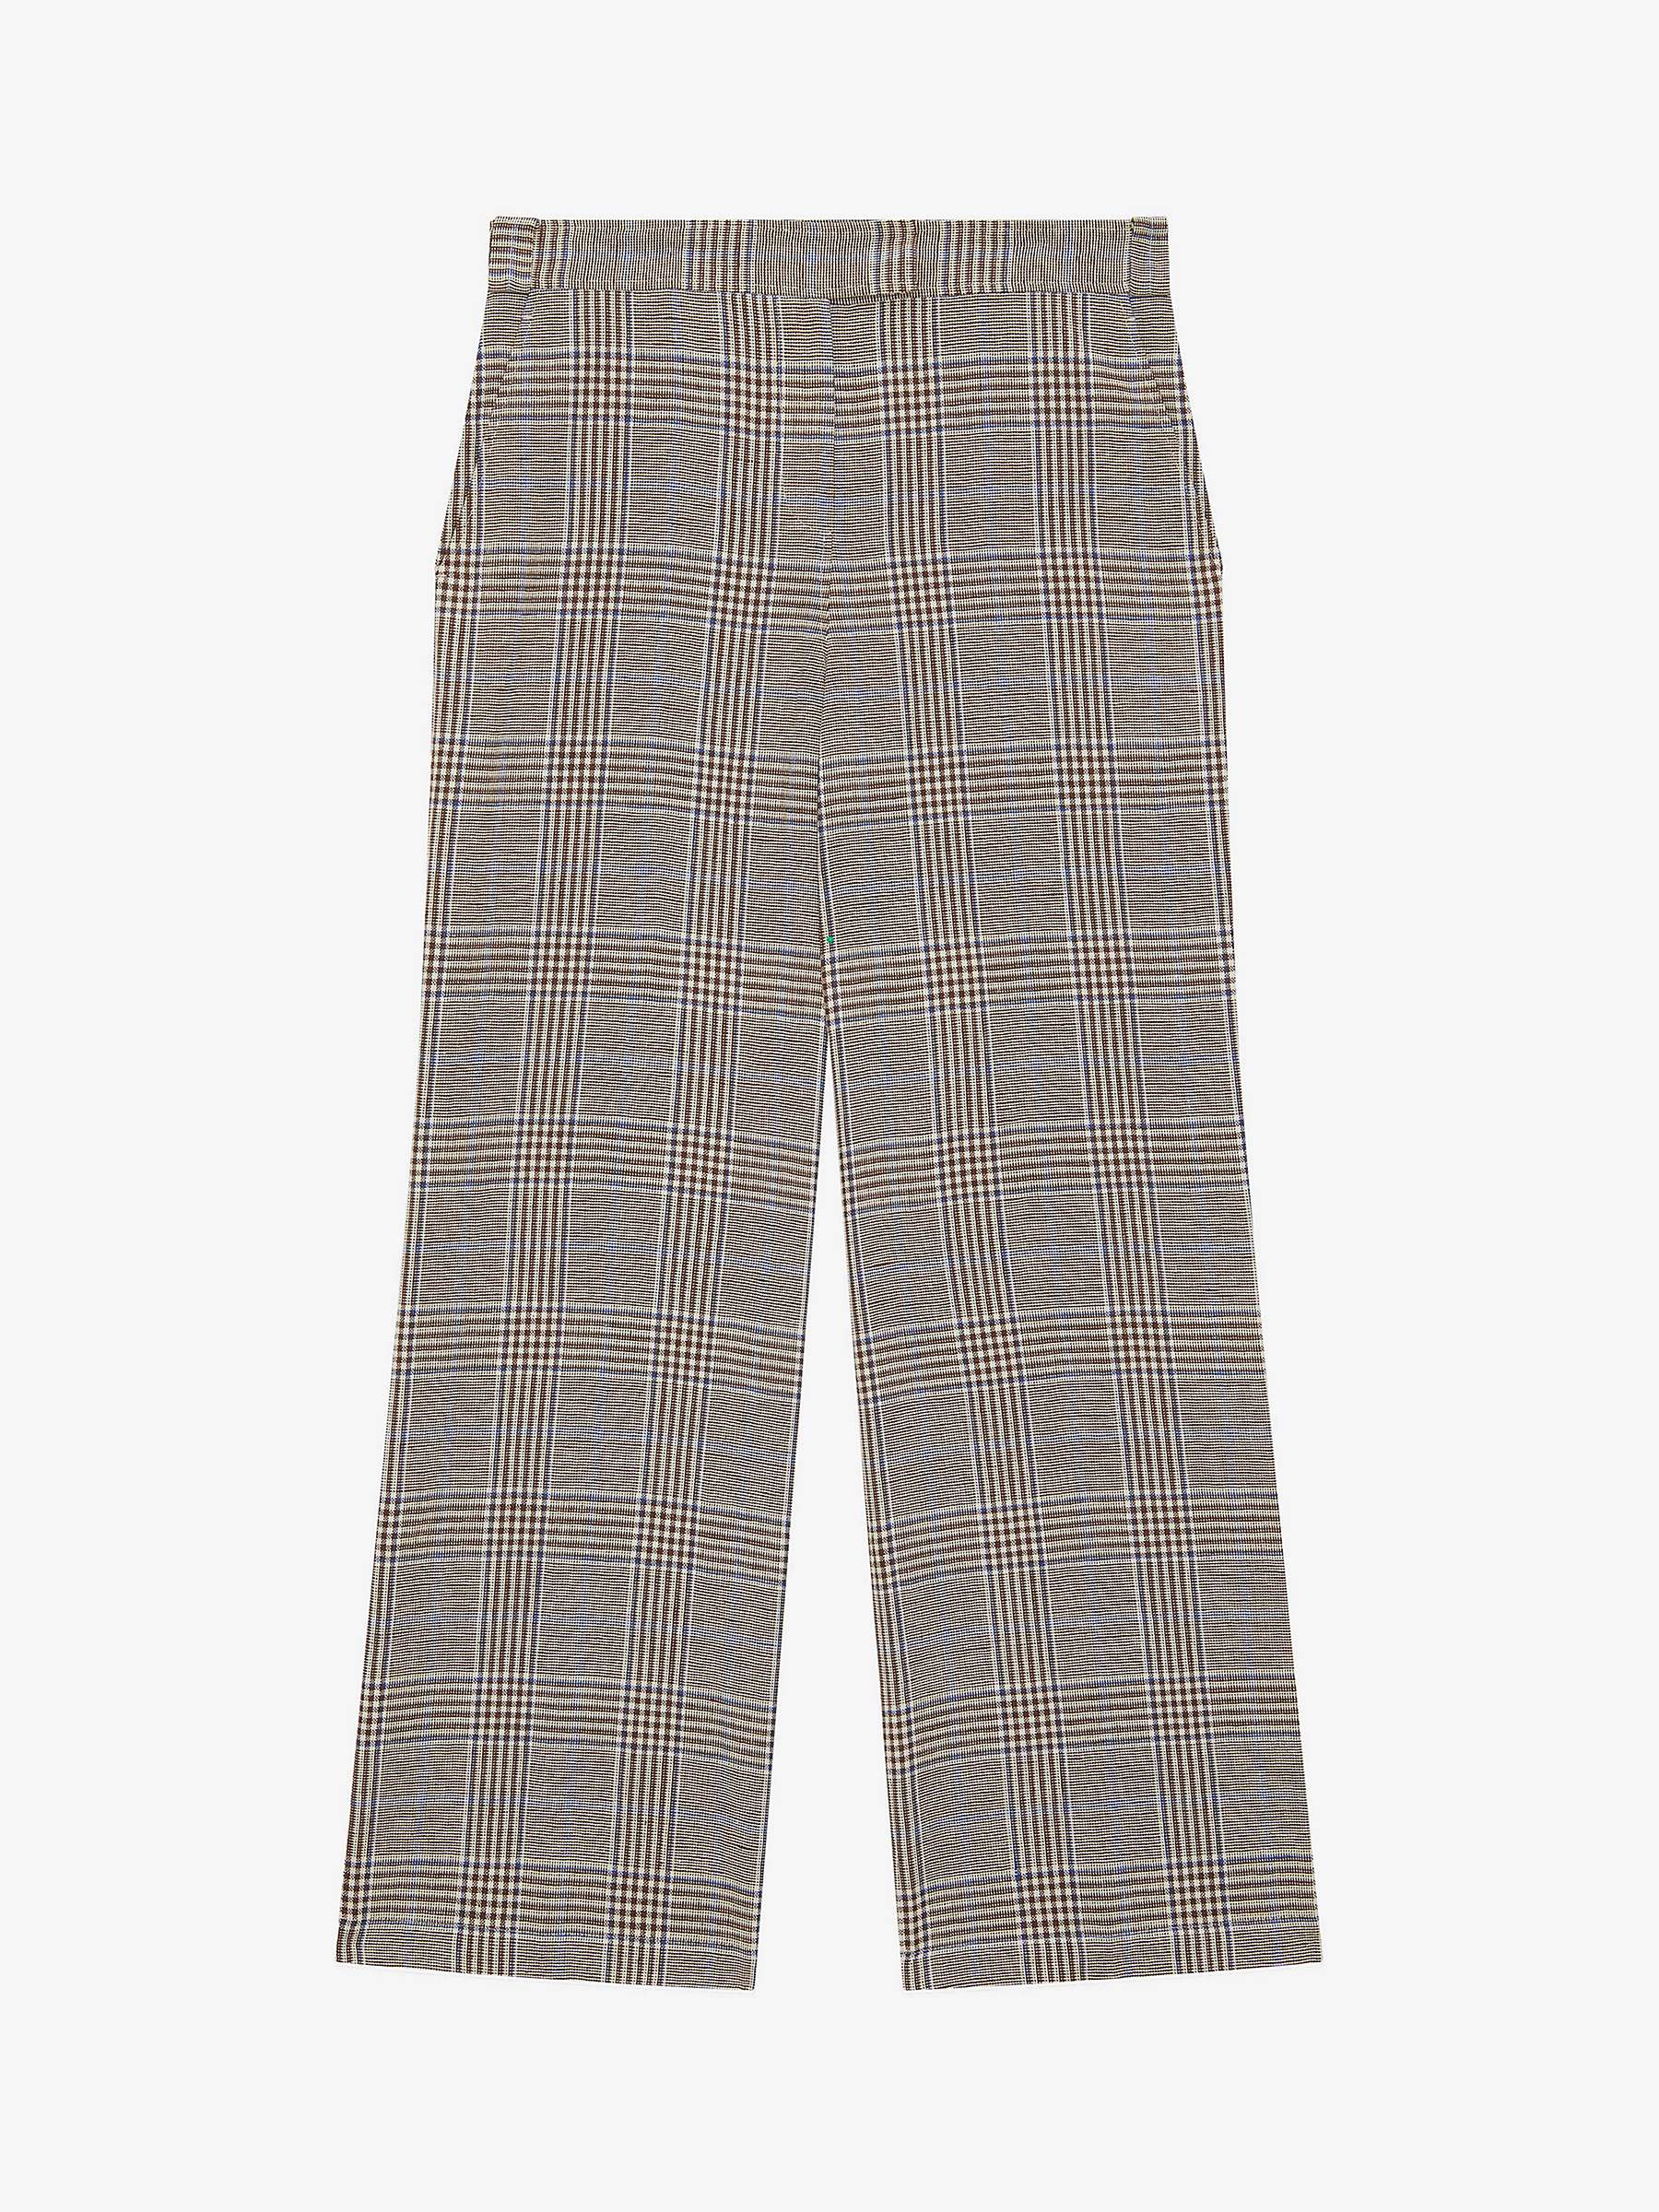 Buy Brora Heritage Check Cotton Linen Blend Trousers, Otter/Multi Online at johnlewis.com